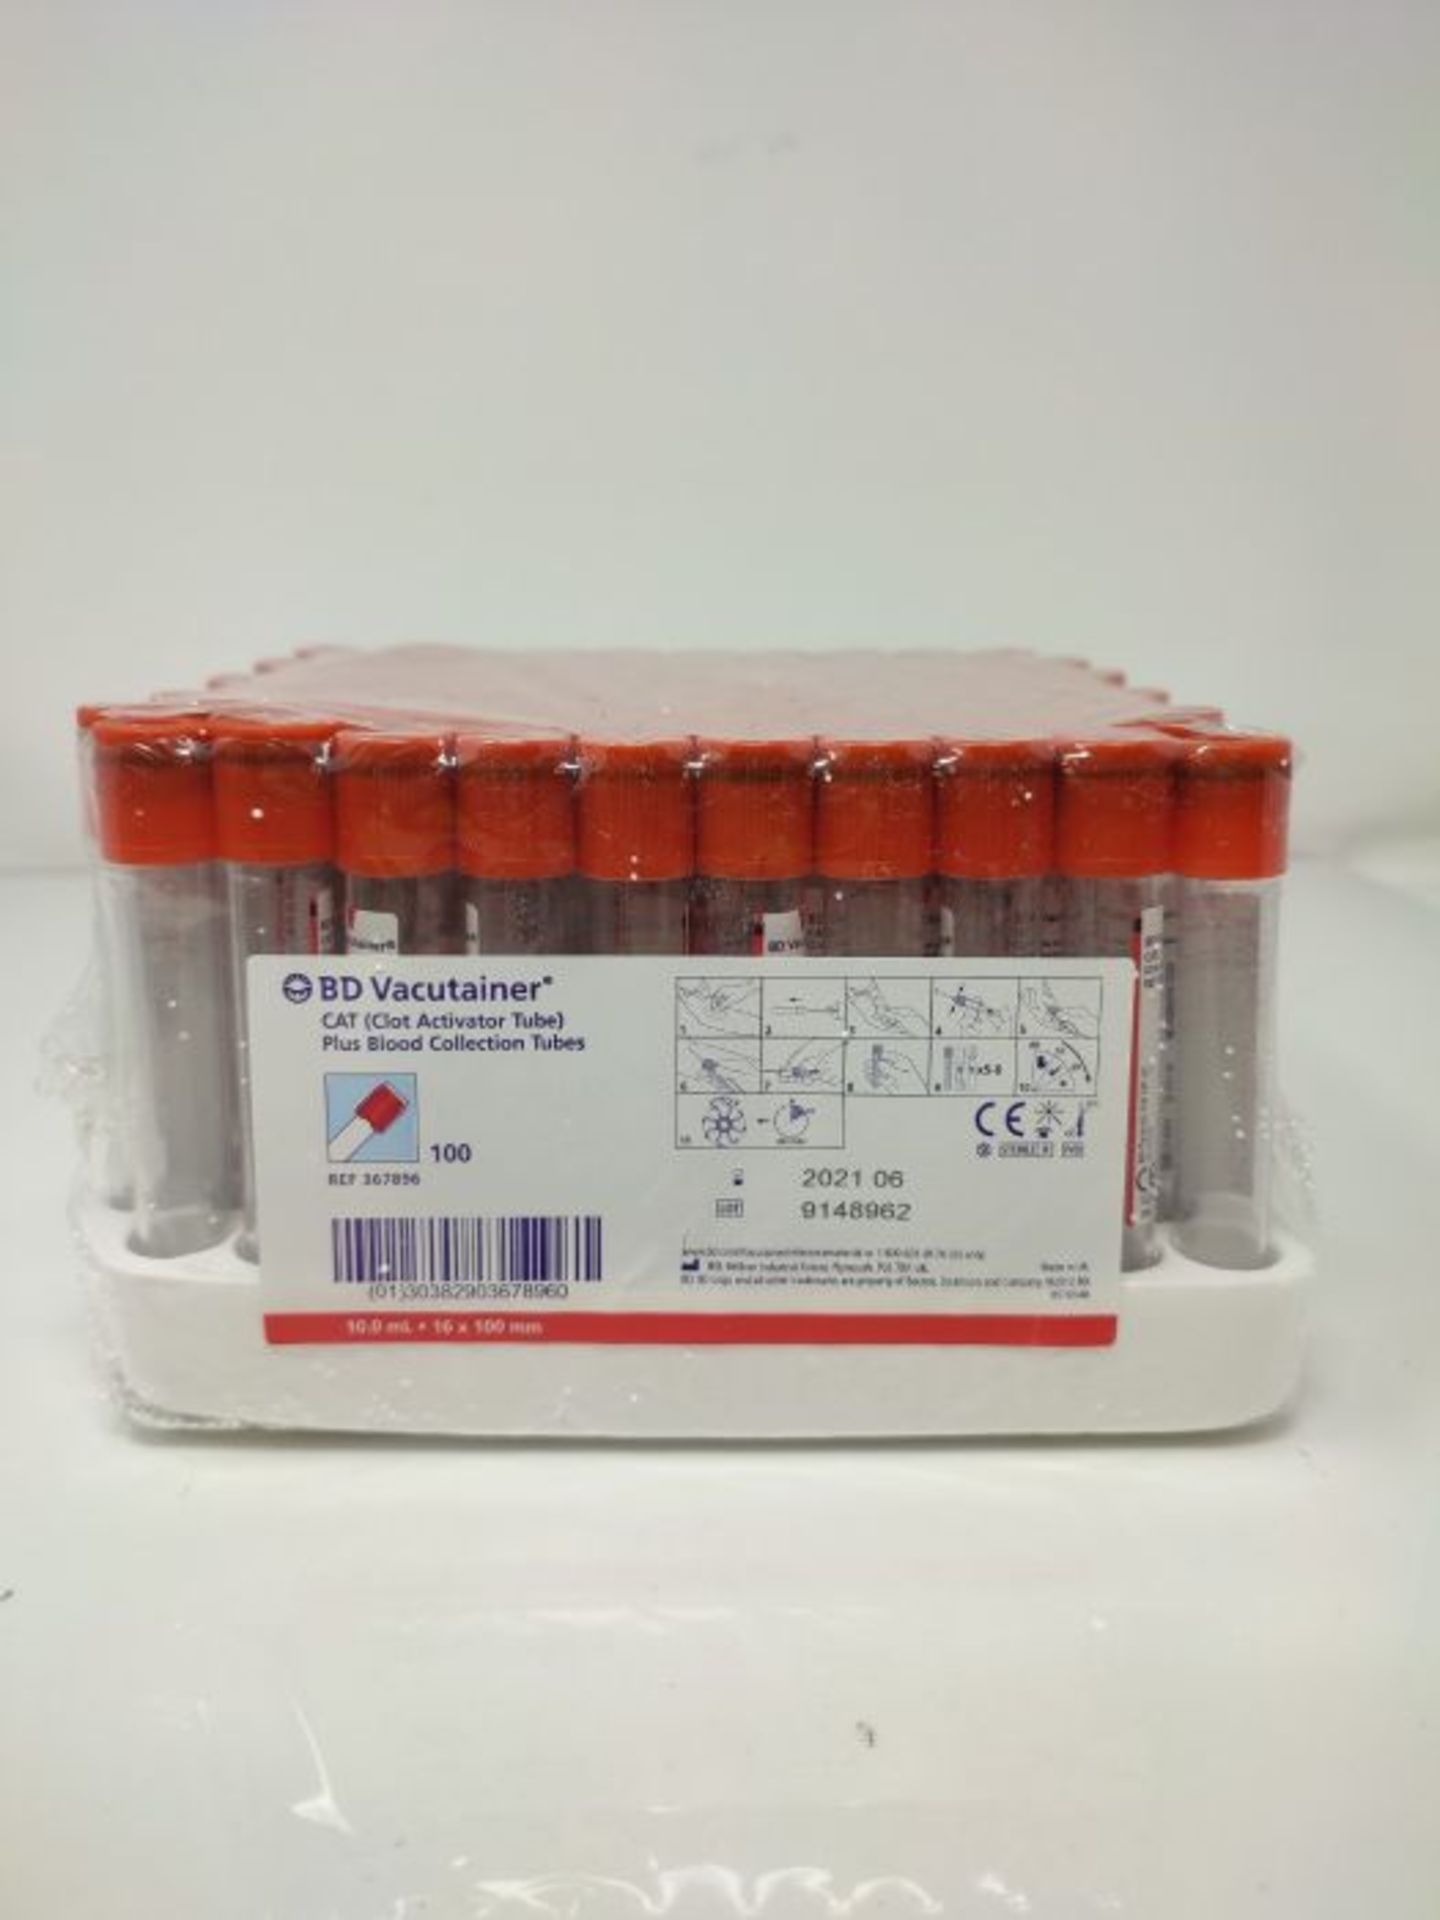 BD VS367896 Vacutainer Tube for Serum Analysis, 10 ml,Pack of 100, Red - Image 2 of 3